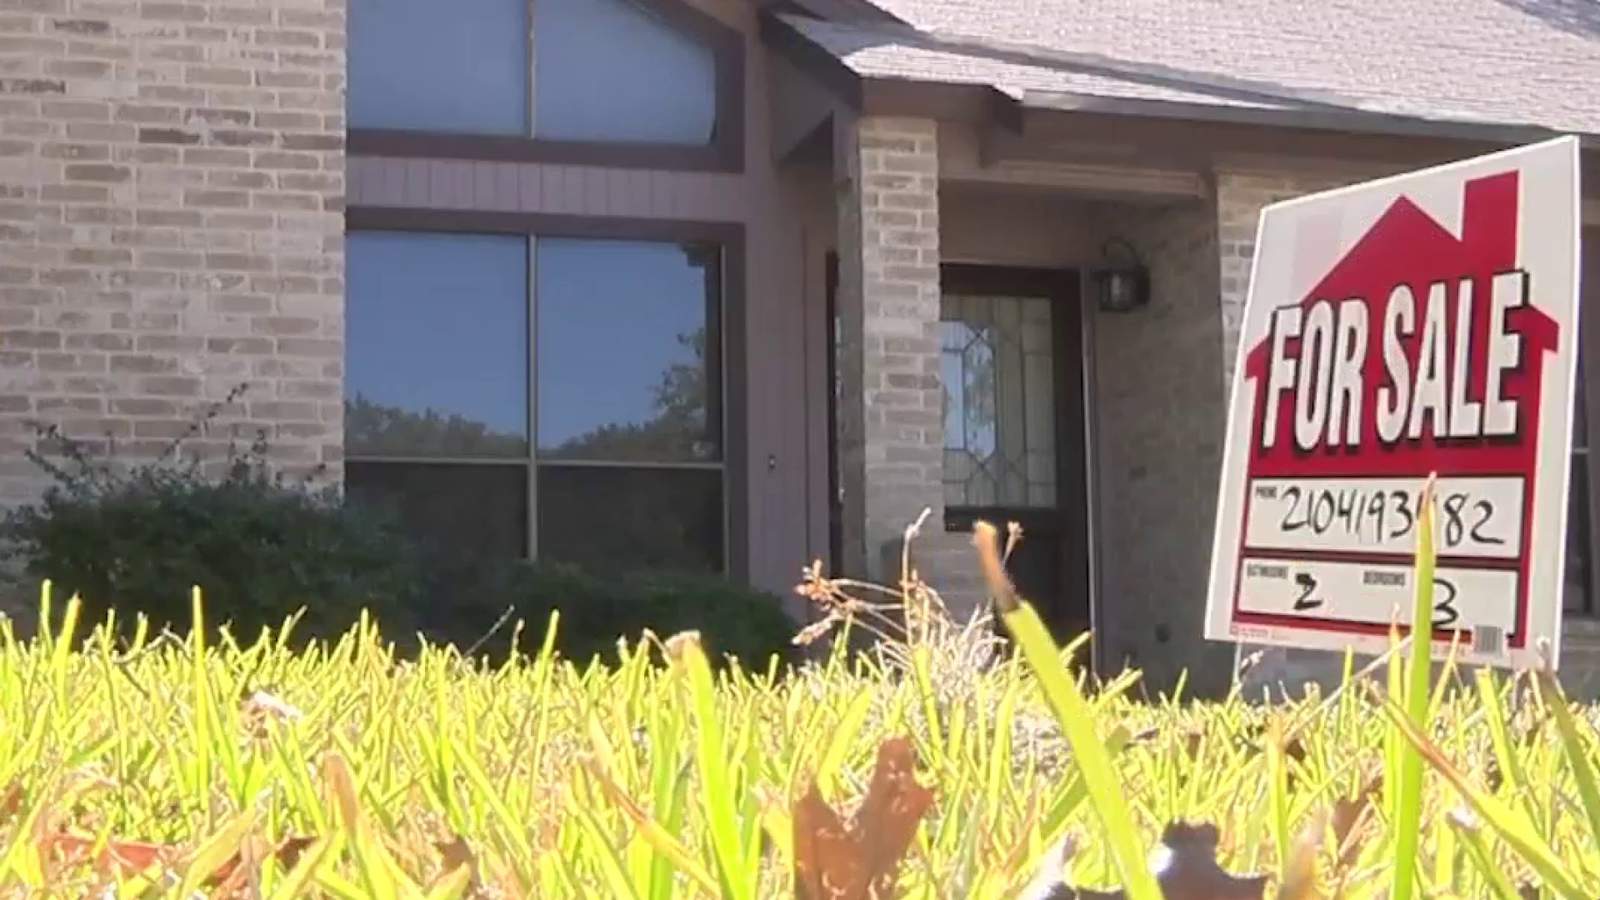 High demand, low mortgage rates in San Antonio housing market forecast